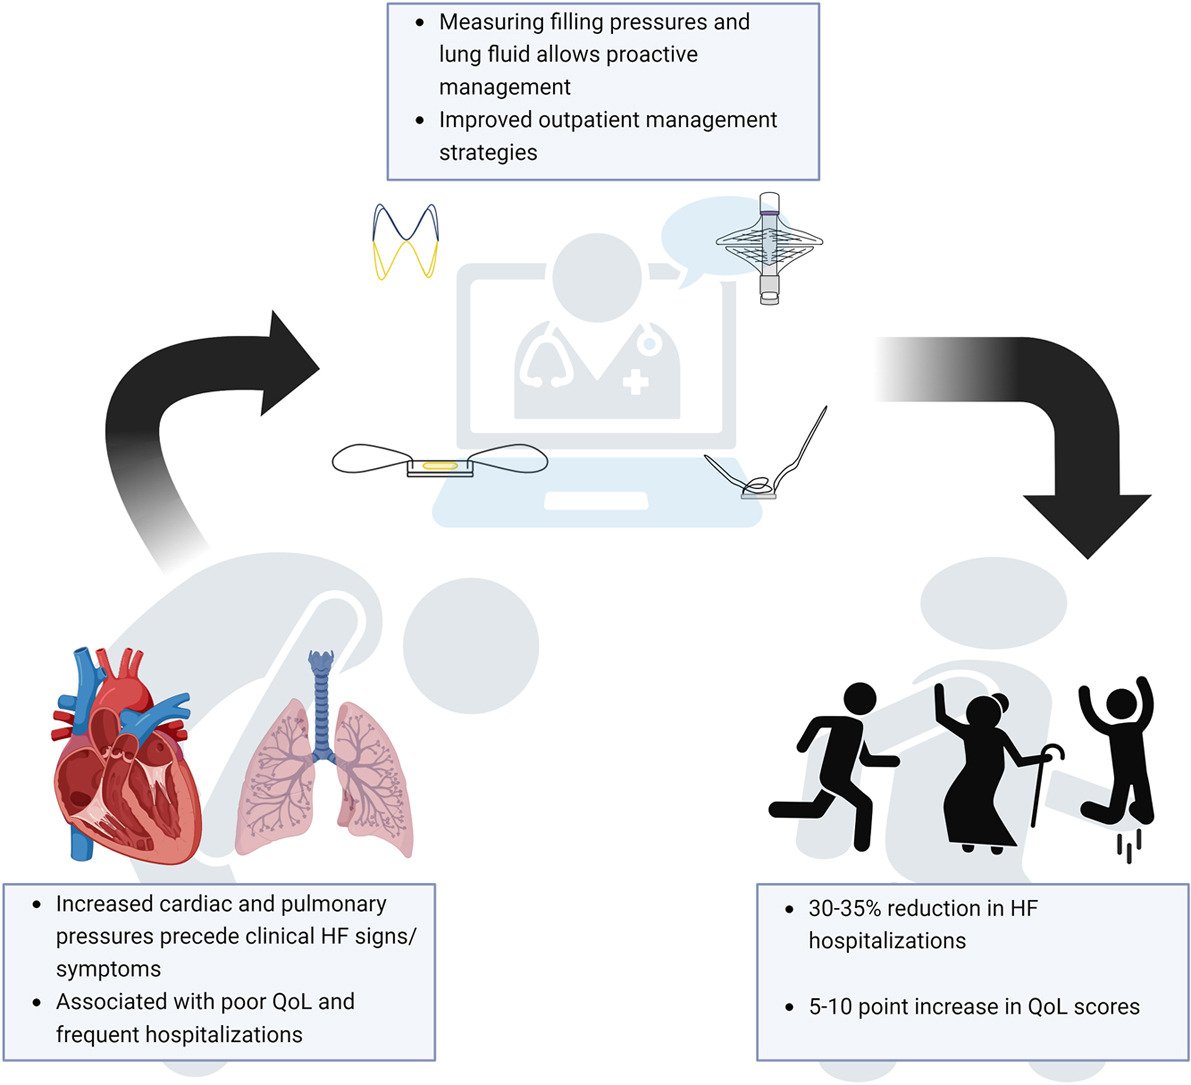 Honored to have had the opportunity to write this review on Hemodynamic Monitoring Devices with the incomparable Bill Abraham (@TheHeartBeat3). @AndrewJSauer @Abraham_Jacob @CvUnmc @OSUWexMed Thanks @MyJSCAI for the invitation to contribute! jscai.org/article/S2772-…